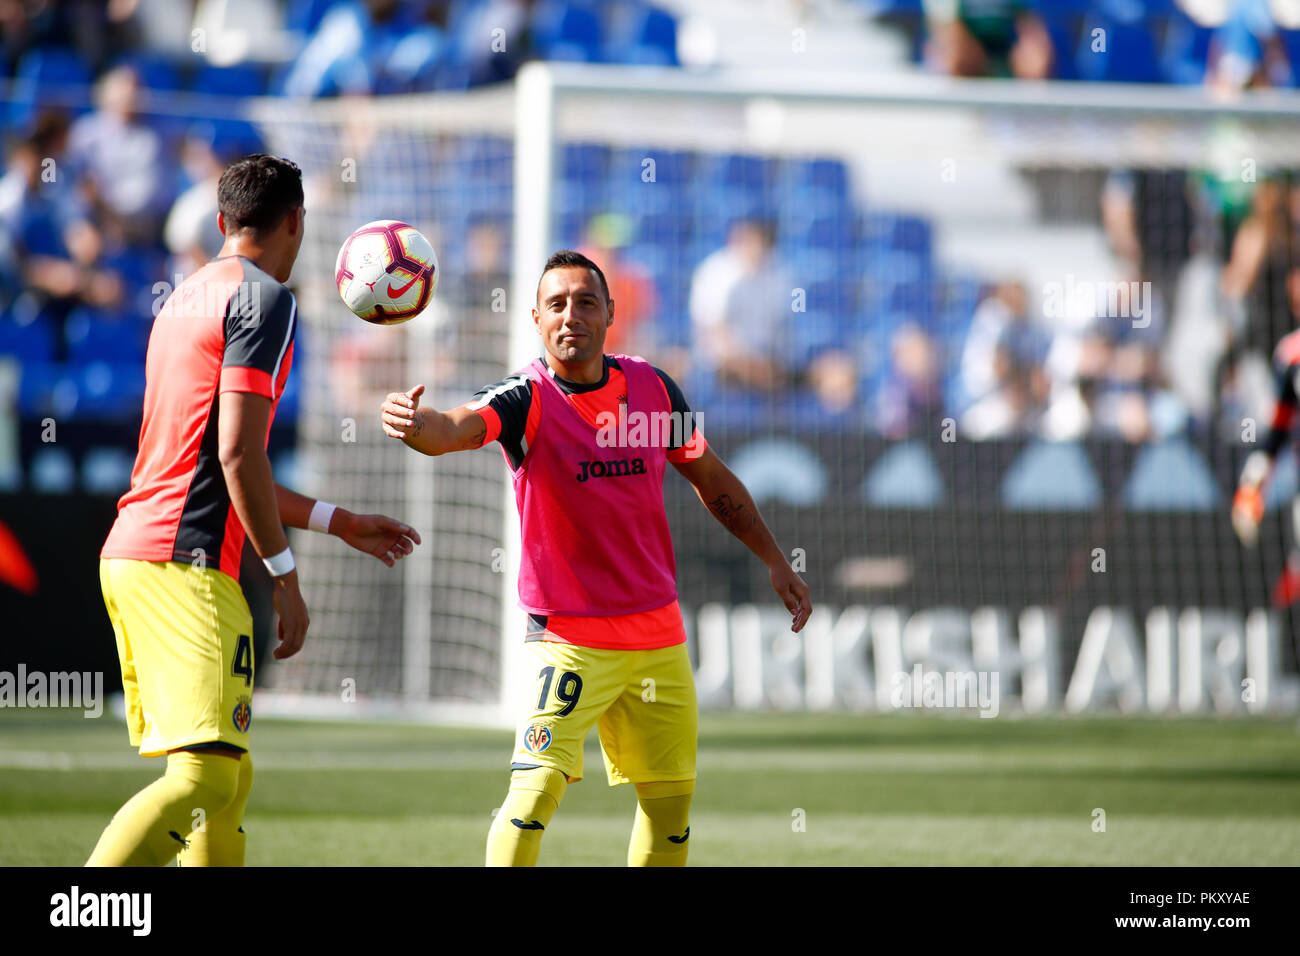 Madrid, Spain. 16th September 2018.  Santi Cazorla of Villarreal during the spanish league, La Liga, football match between CD Leganes and Villarreal CF on September 16th, 2018 at Municipal Butarque stadium in Madrid, Spain. 16th Sep, 2018. Credit: AFP7/ZUMA Wire/Alamy Live News Stock Photo